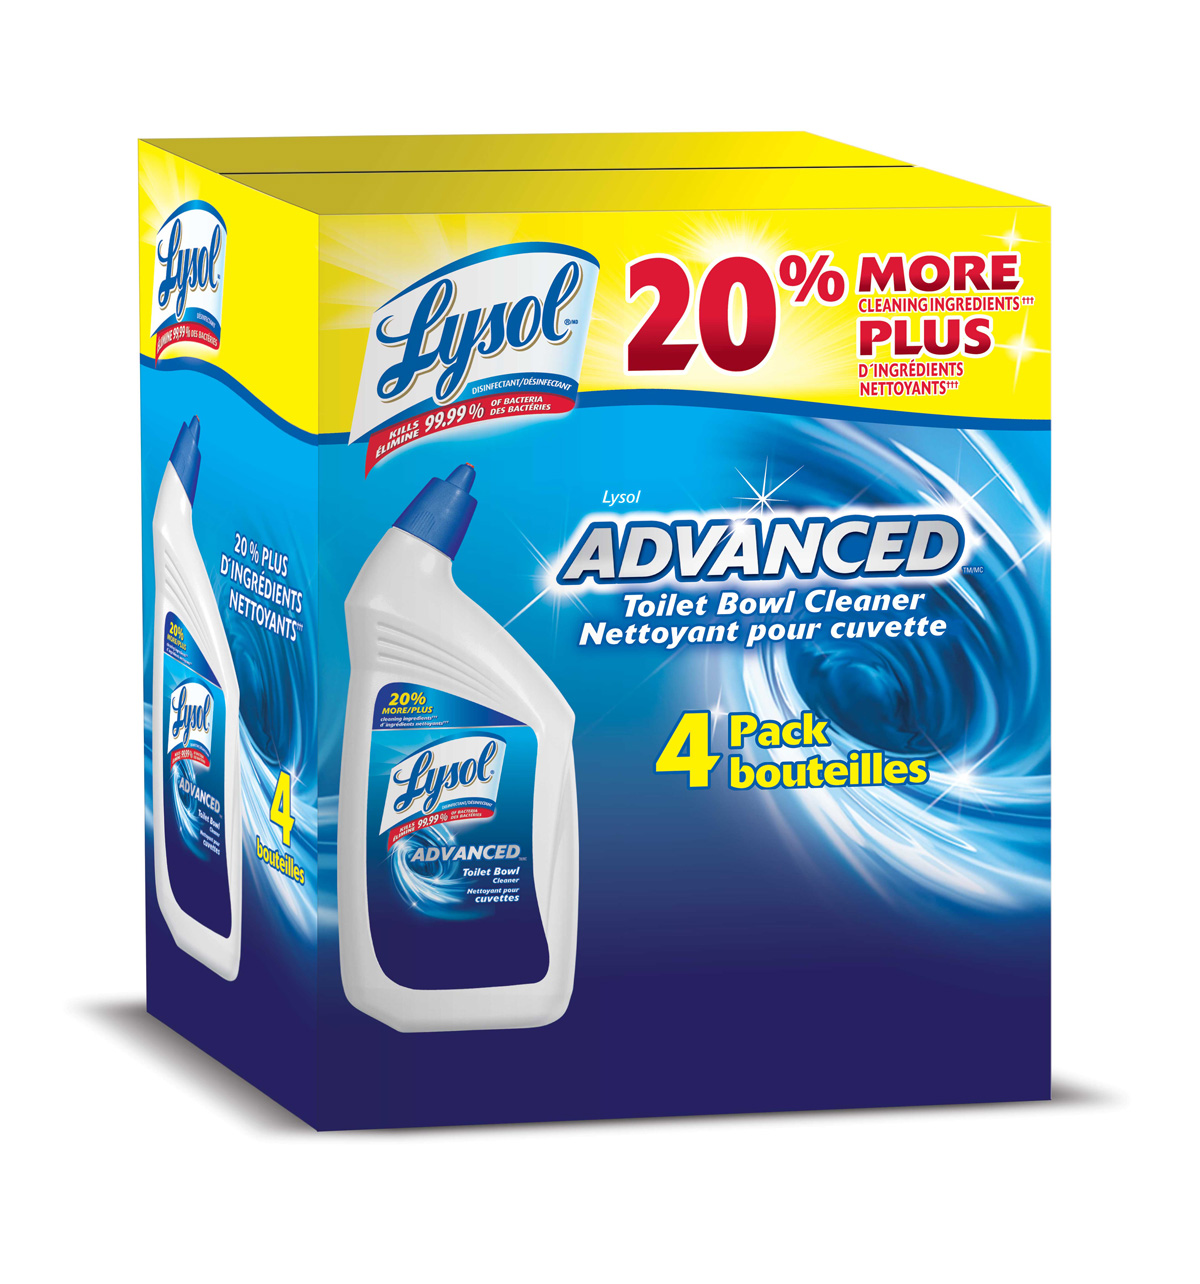 LYSOL® Disinfectant Advanced Toilet Bowl Cleaner (Canada) (Discontinued June 1, 2021)